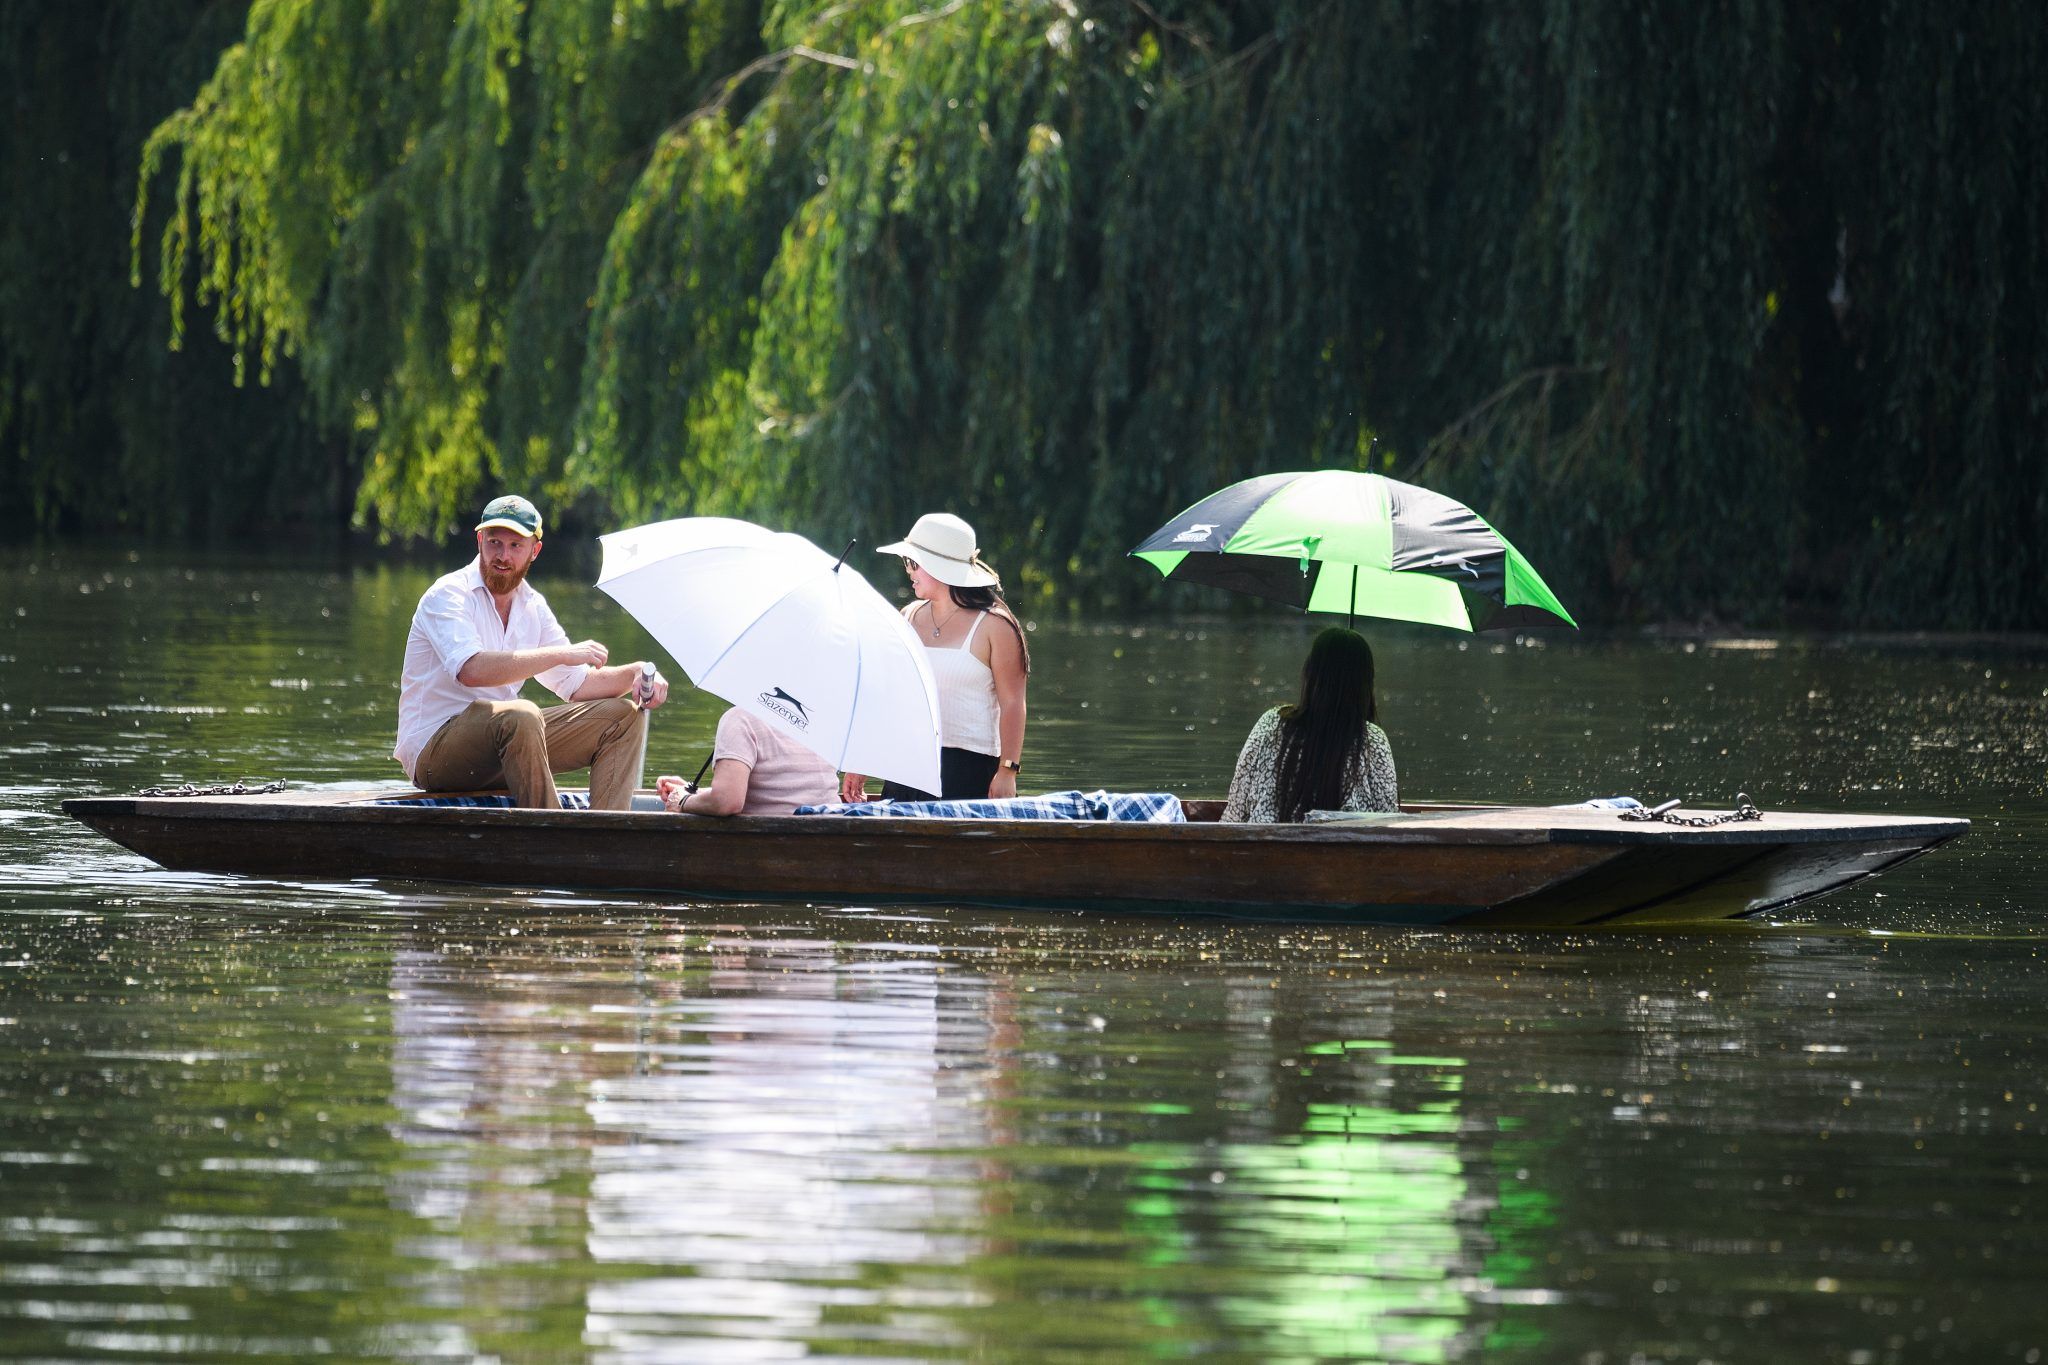 CAMBRIDGE, ENGLAND - JULY 25: A traditional punt floats on the River Cam on July 25, 2019 in Cambridge, United Kingdom. The Met Office issued a weather warning from 3pm this afternoon. They warn that Britain could face up to 13 hours of electrical storms after it was forecast that temperatures could reach a record-breaking 39C. A temperature reading of 38.1 °C has been recorded in Cambridge, this is only the second time temperatures over 100 Fahrenheit have been recorded in the UK. (Photo by Leon Neal/Getty Images)